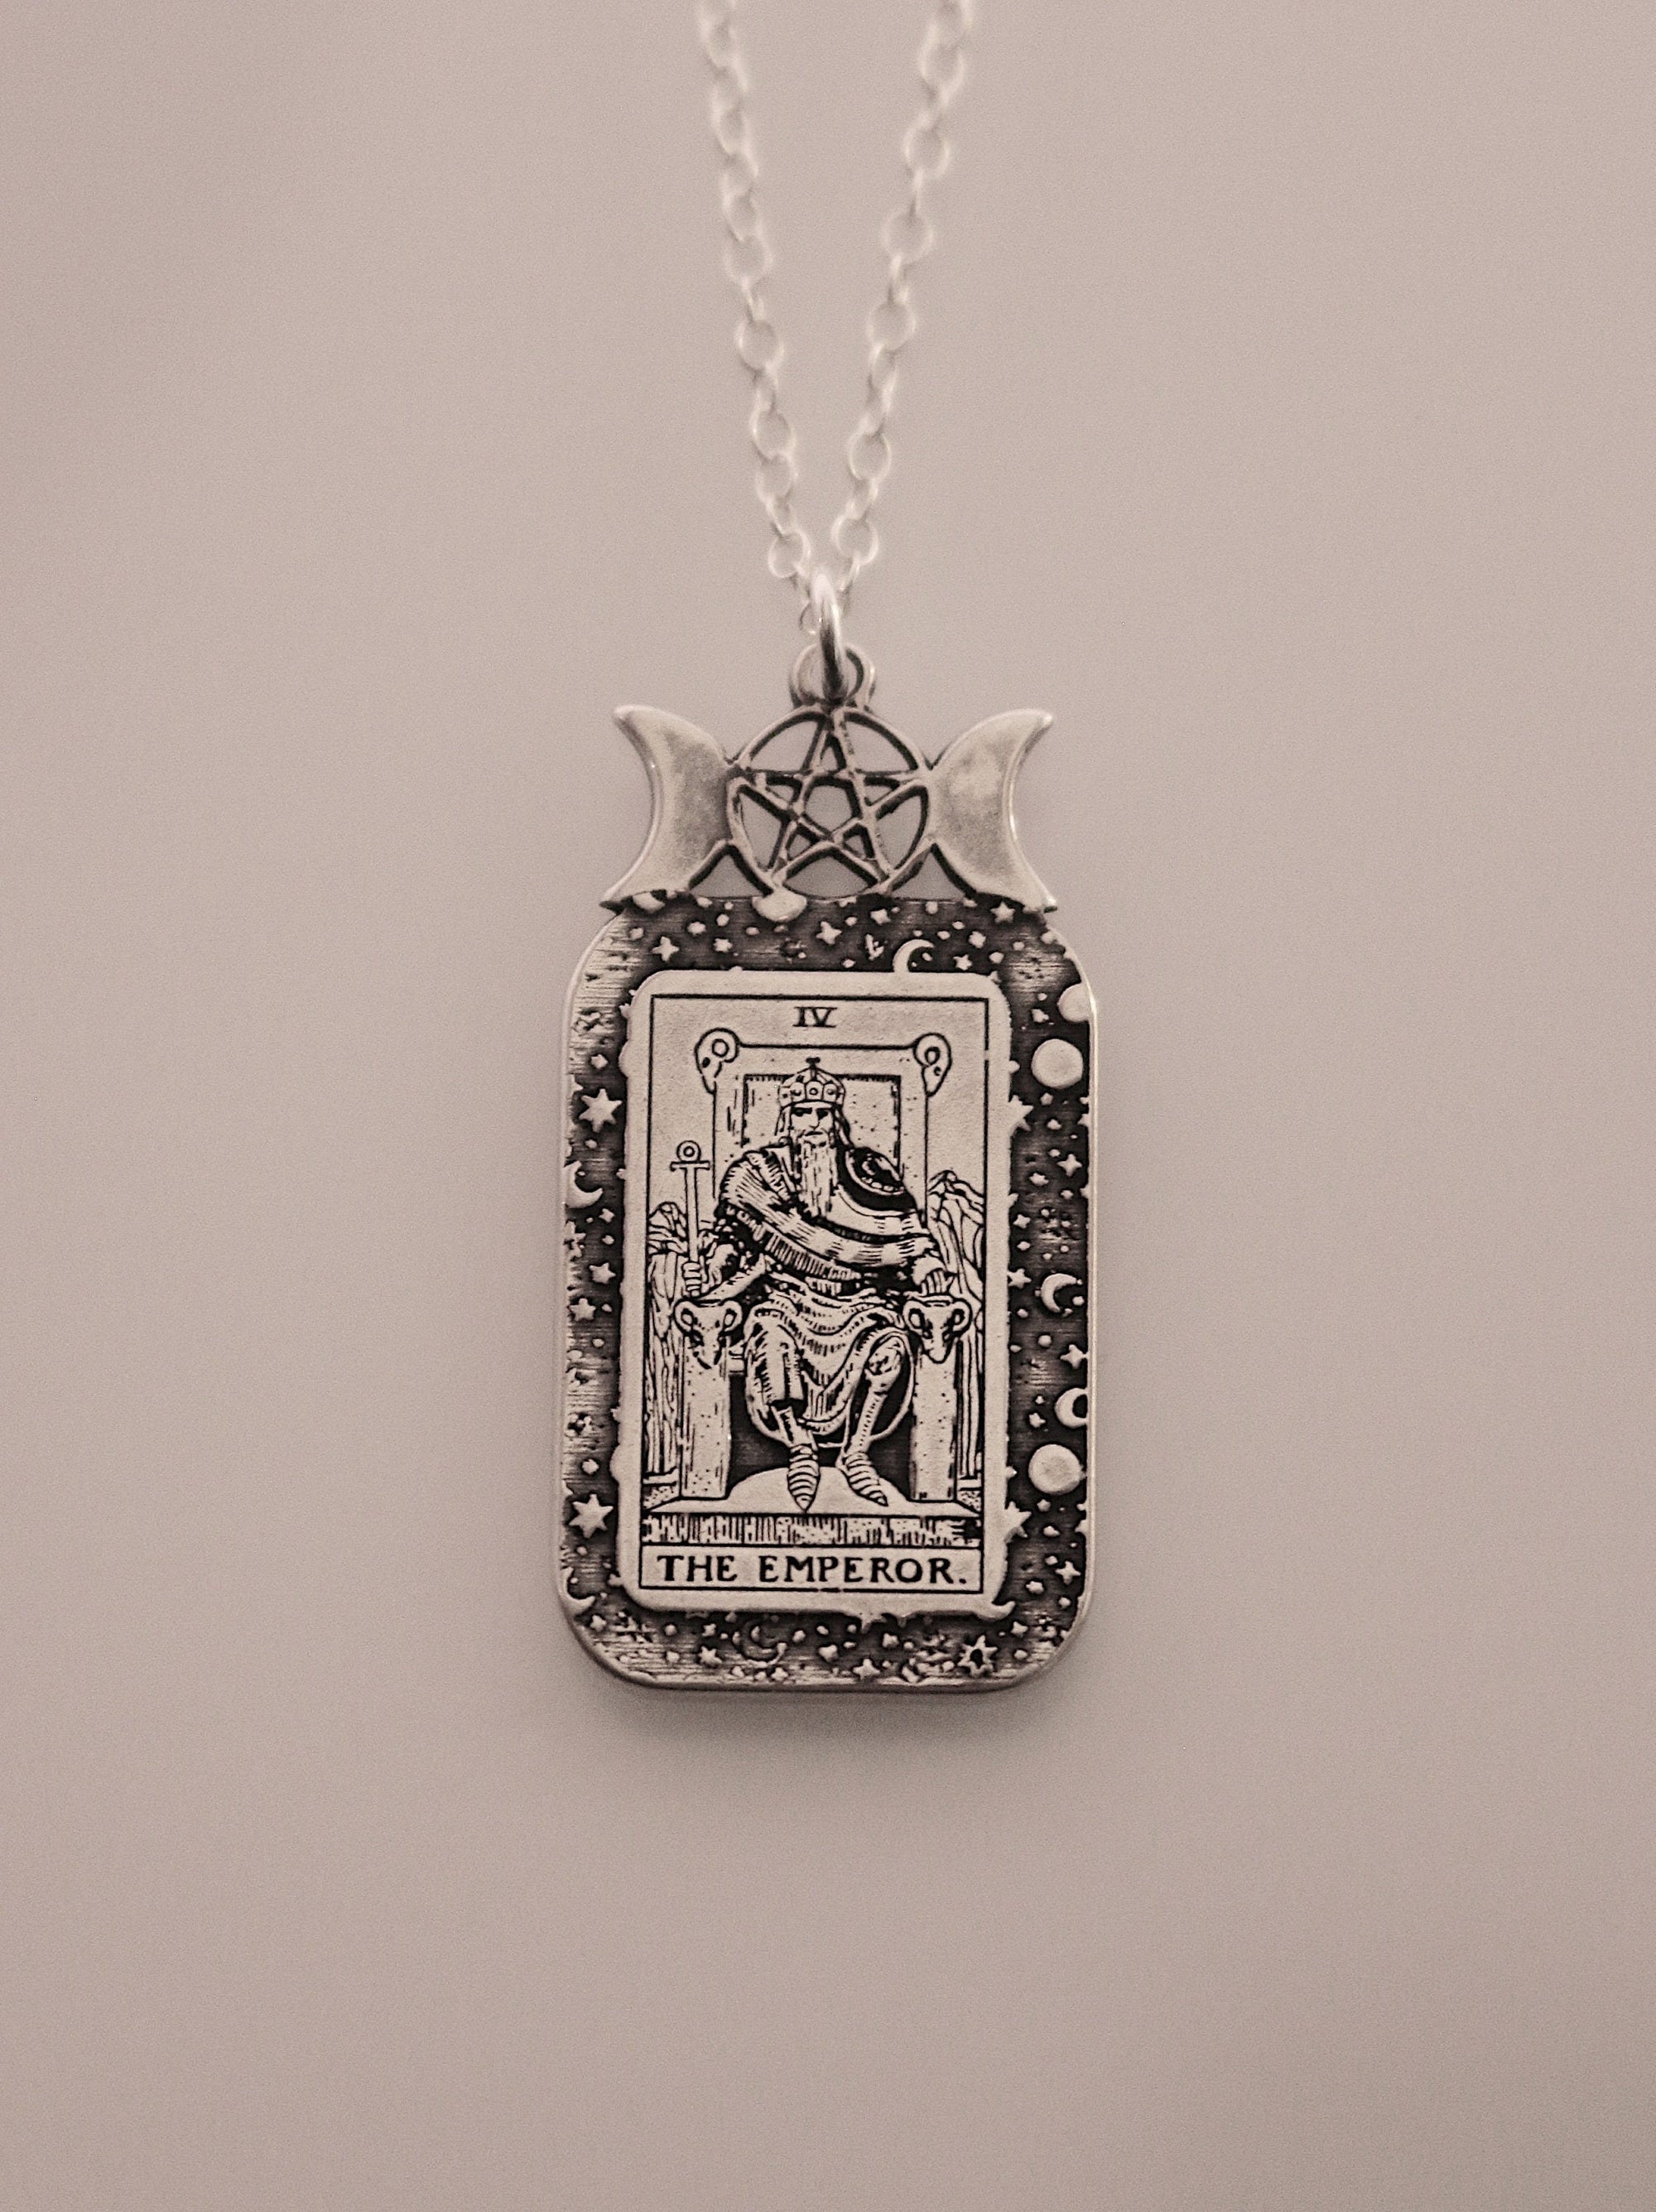 The Emperor Tarot Card Necklace | Best Friend Birthday Gift | Tarot Card Necklace | Celestial Triple Moon Goddess Jewelry | Witch Necklace